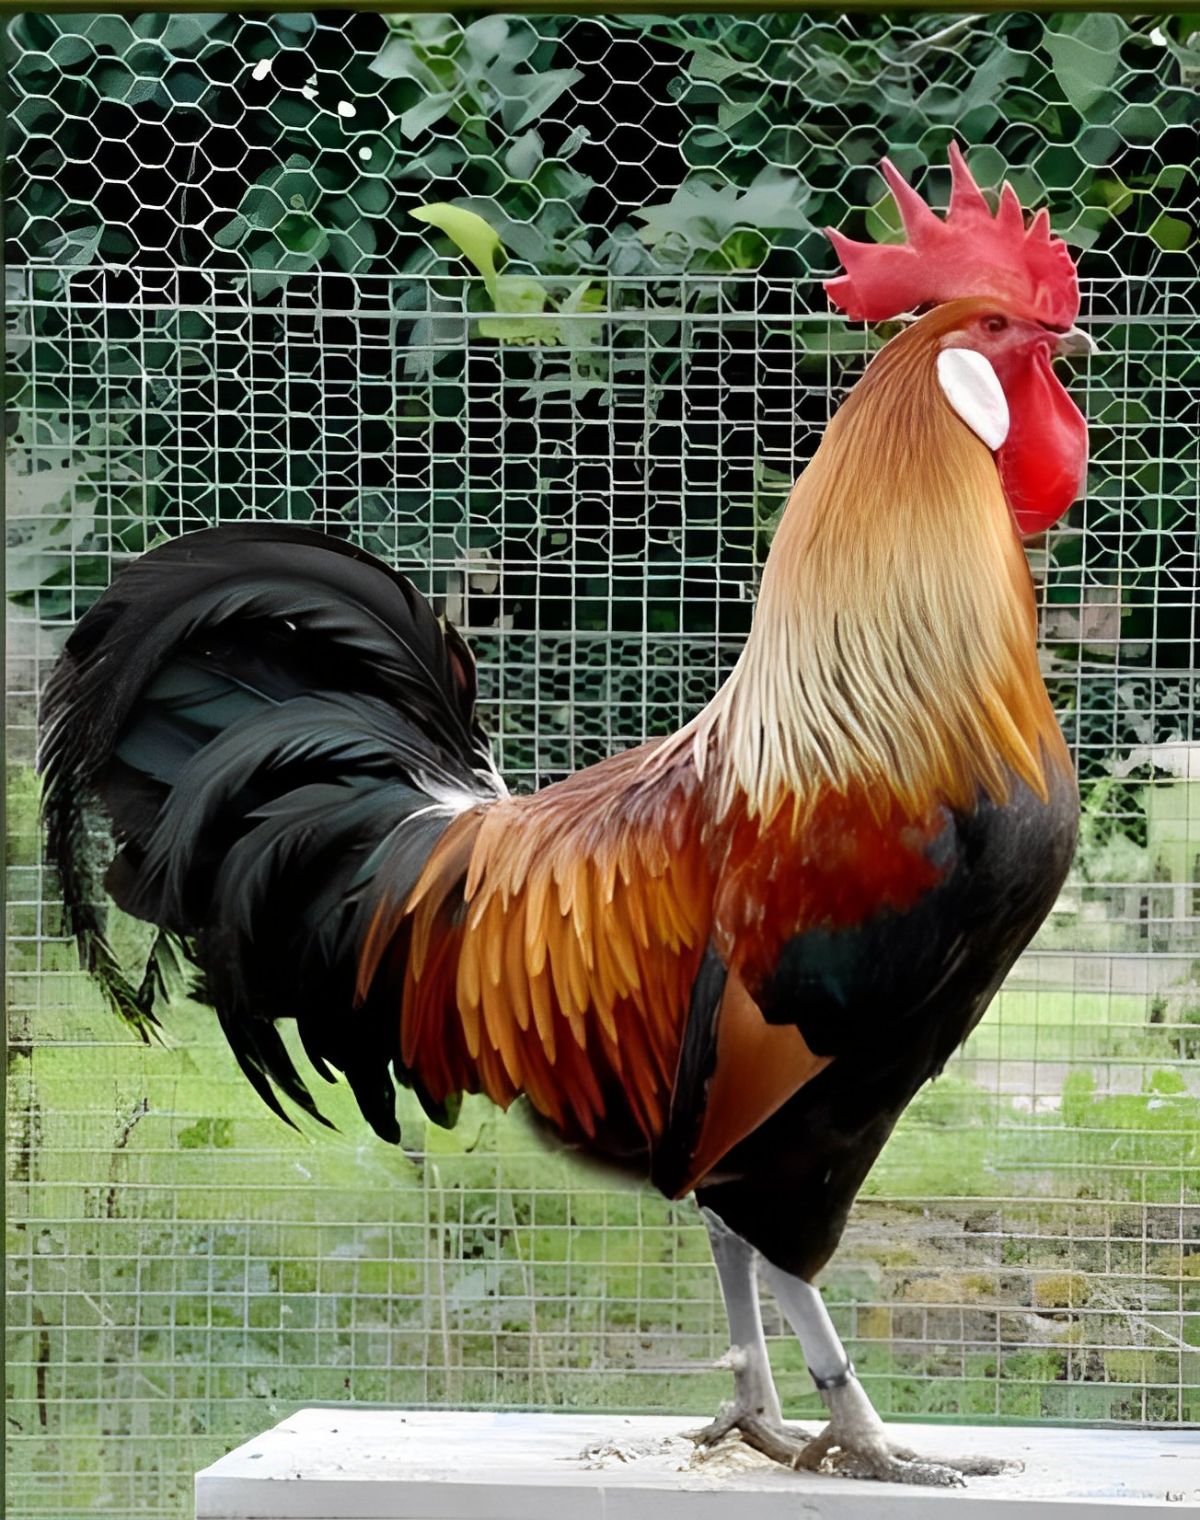 A beautiful Utrerana rooster standing on a wooden board.